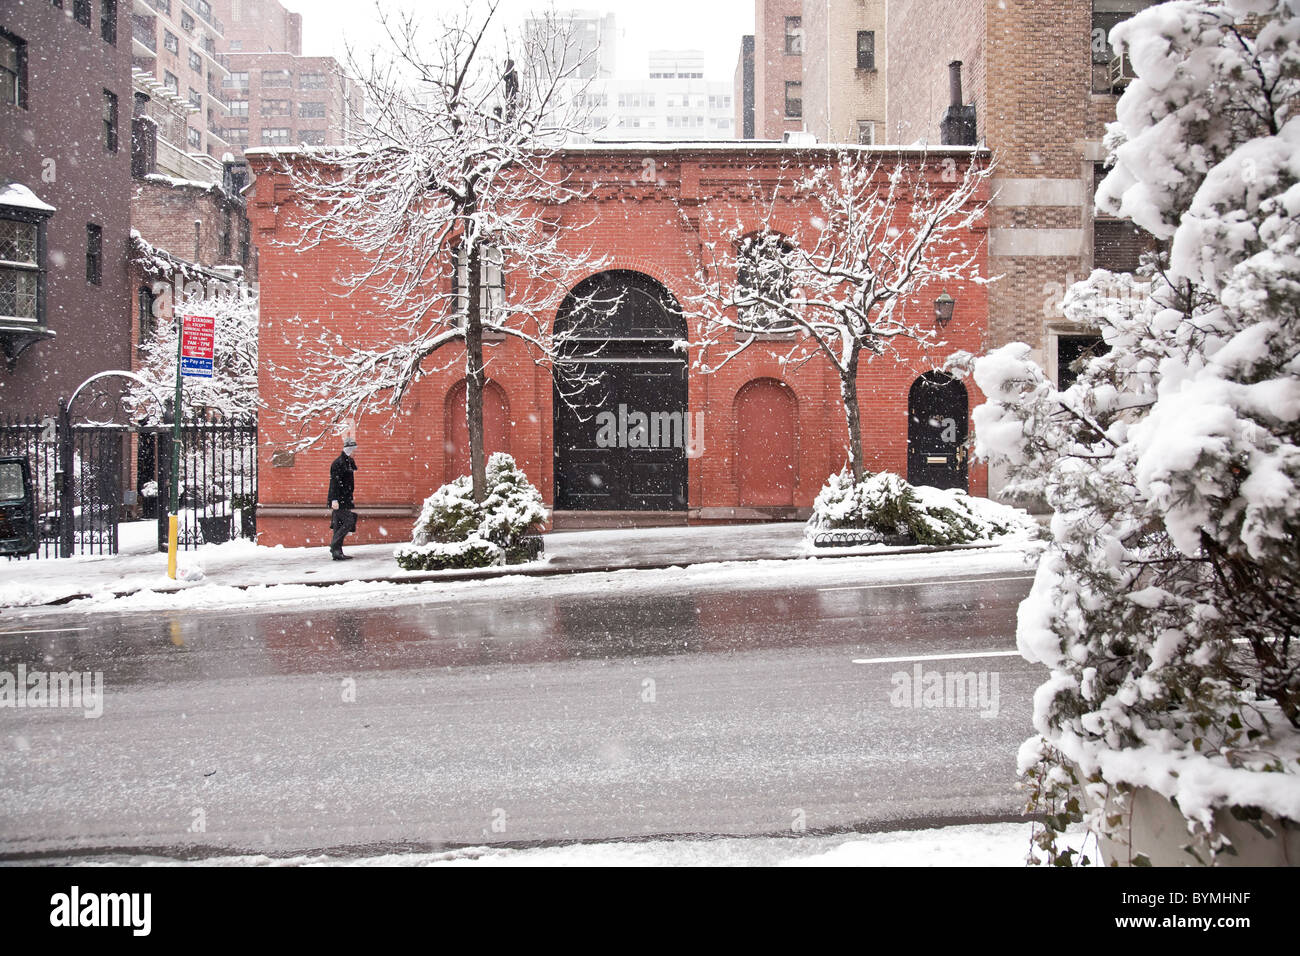 Amateur Comedy Club Building, Snow Storm, Murray Hill, Midtown, NYC, east 36th street Banque D'Images